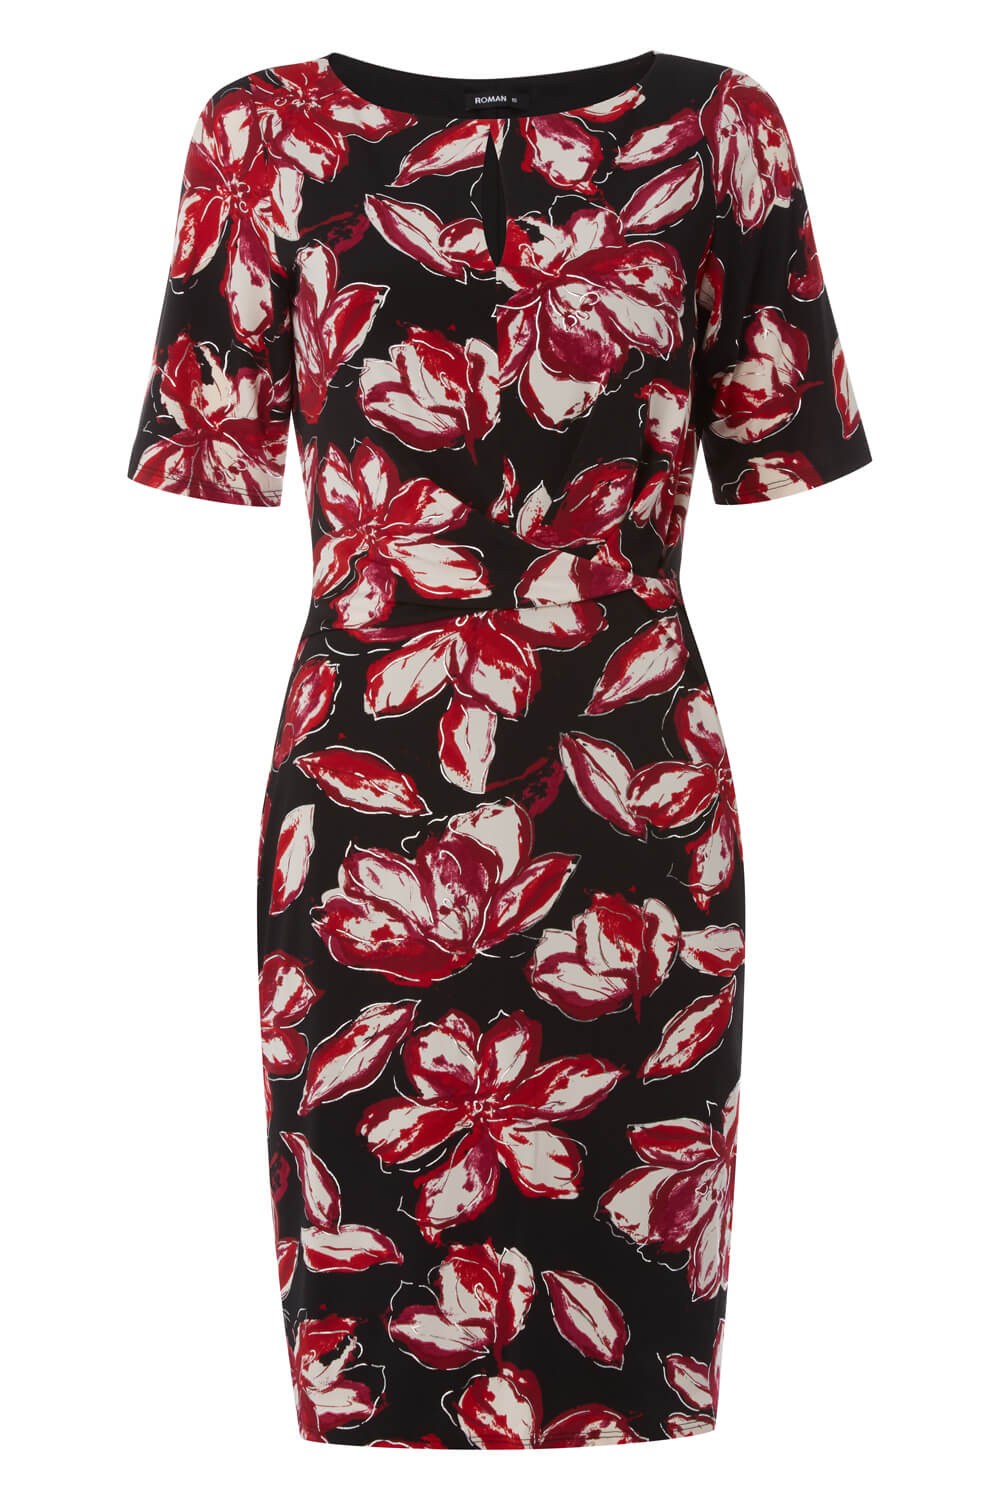 Red Floral Print Dress, Image 4 of 4